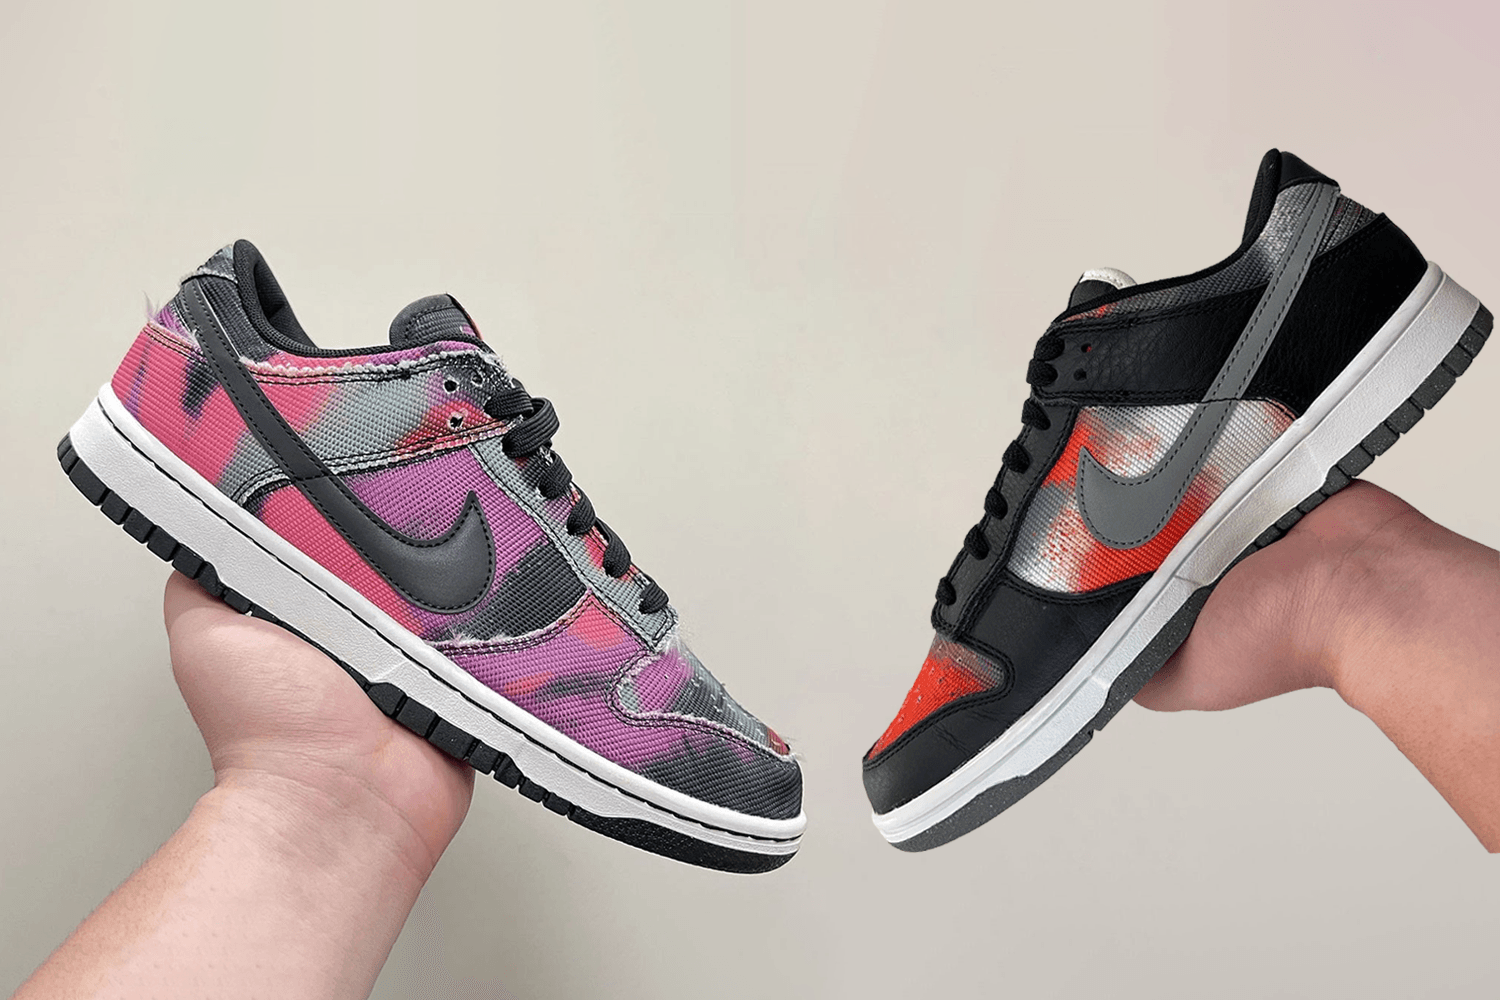 The upcoming running Nike Dunk Low 'Graffiti' Pack in detail